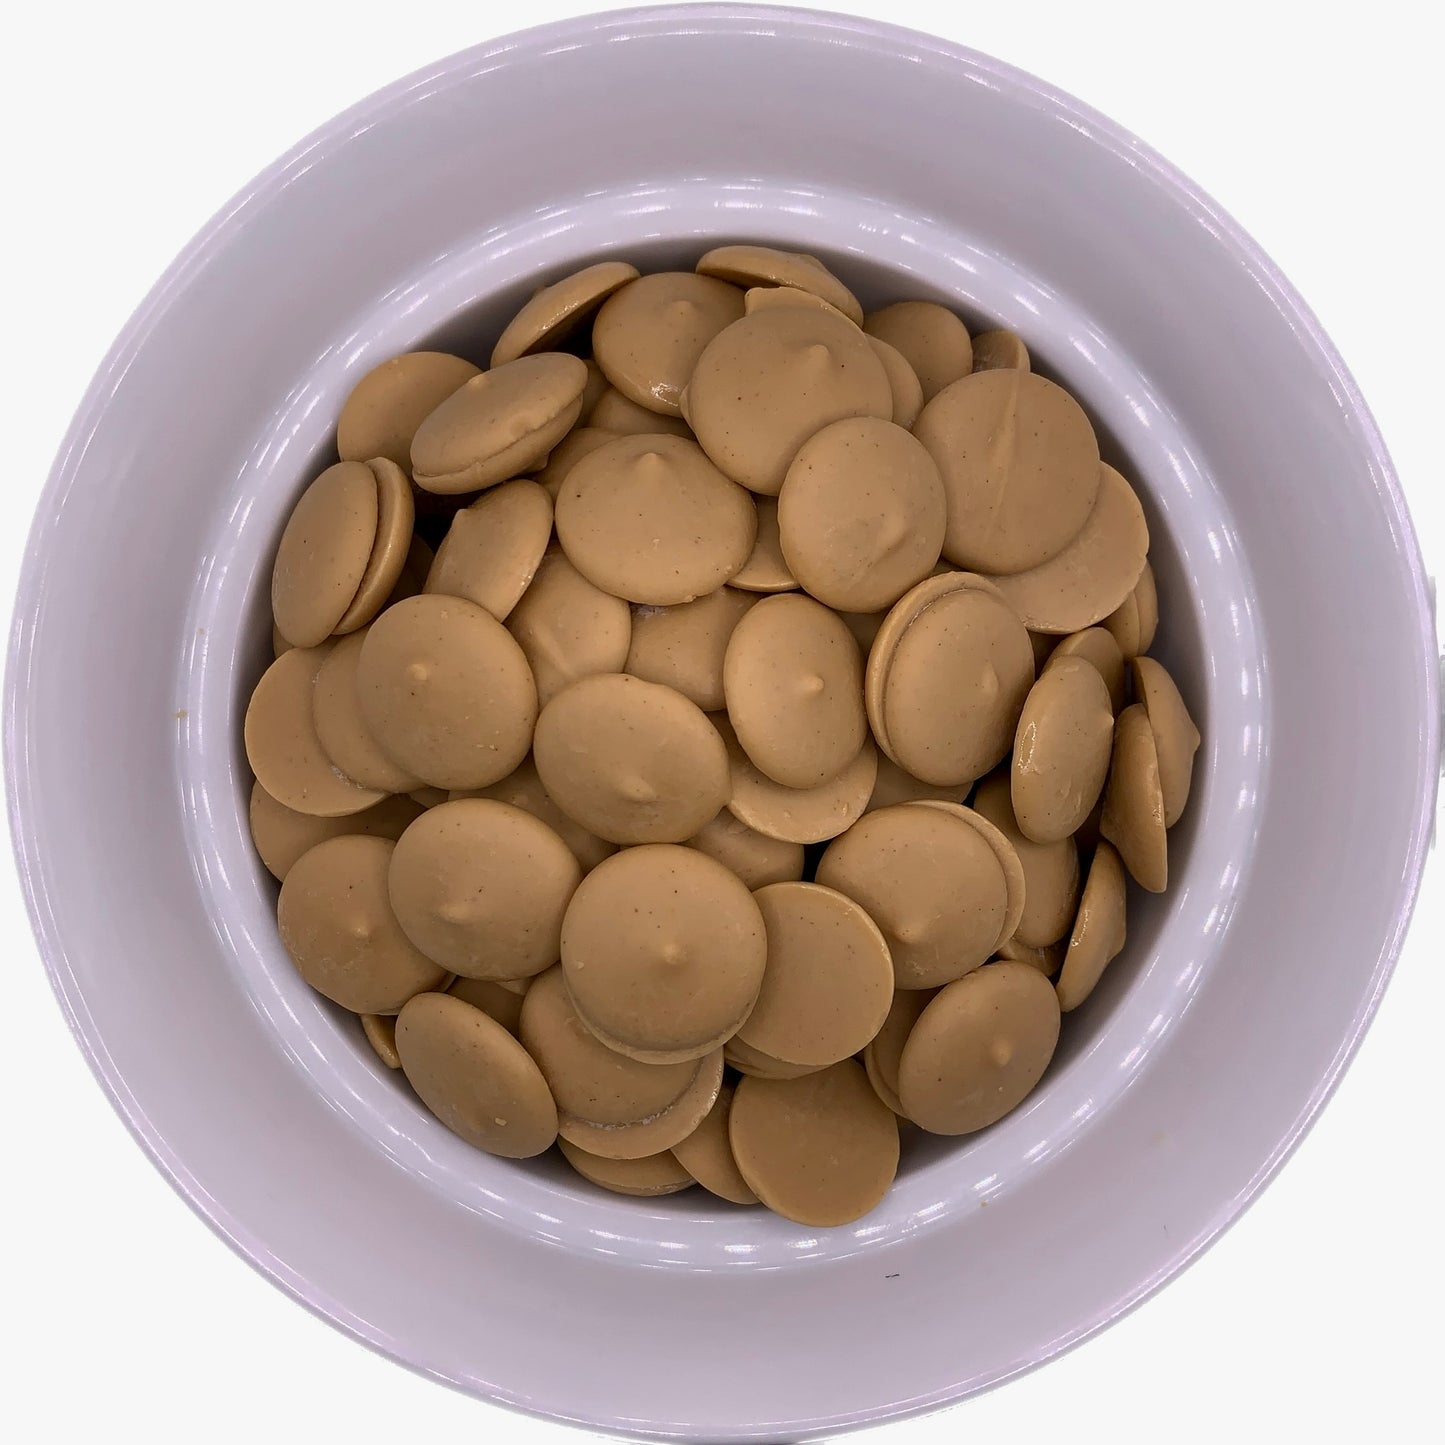 Peanut Butter Flavored Chocolate Confectionery Melting Wafers in a white bowl, embodying the smooth texture and nutty flavor ideal for peanut butter themed treats and decorations.